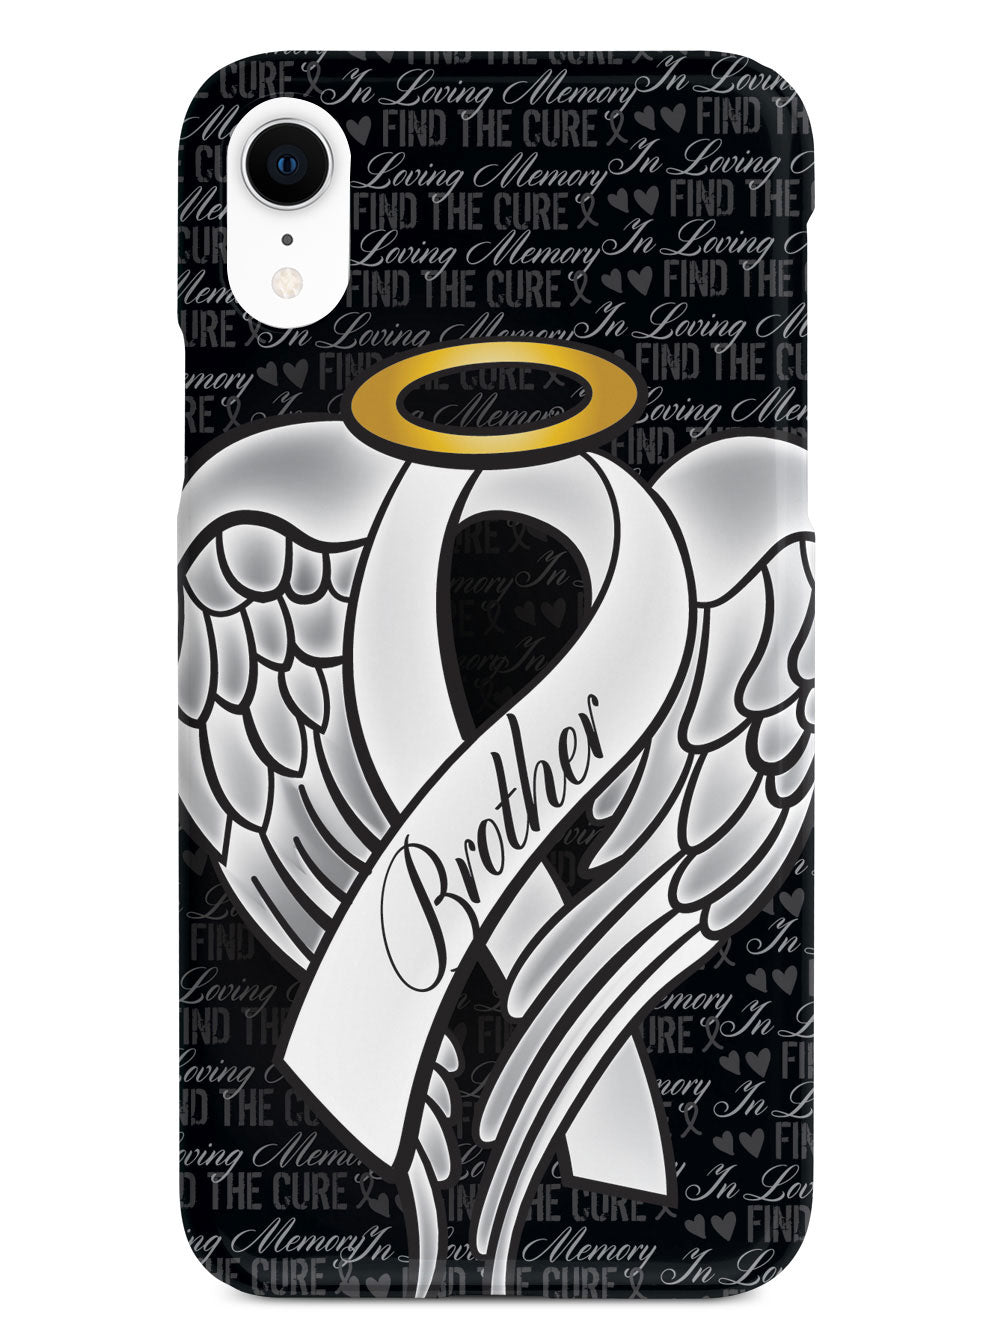 In Loving Memory of My Brother - White Ribbon Case